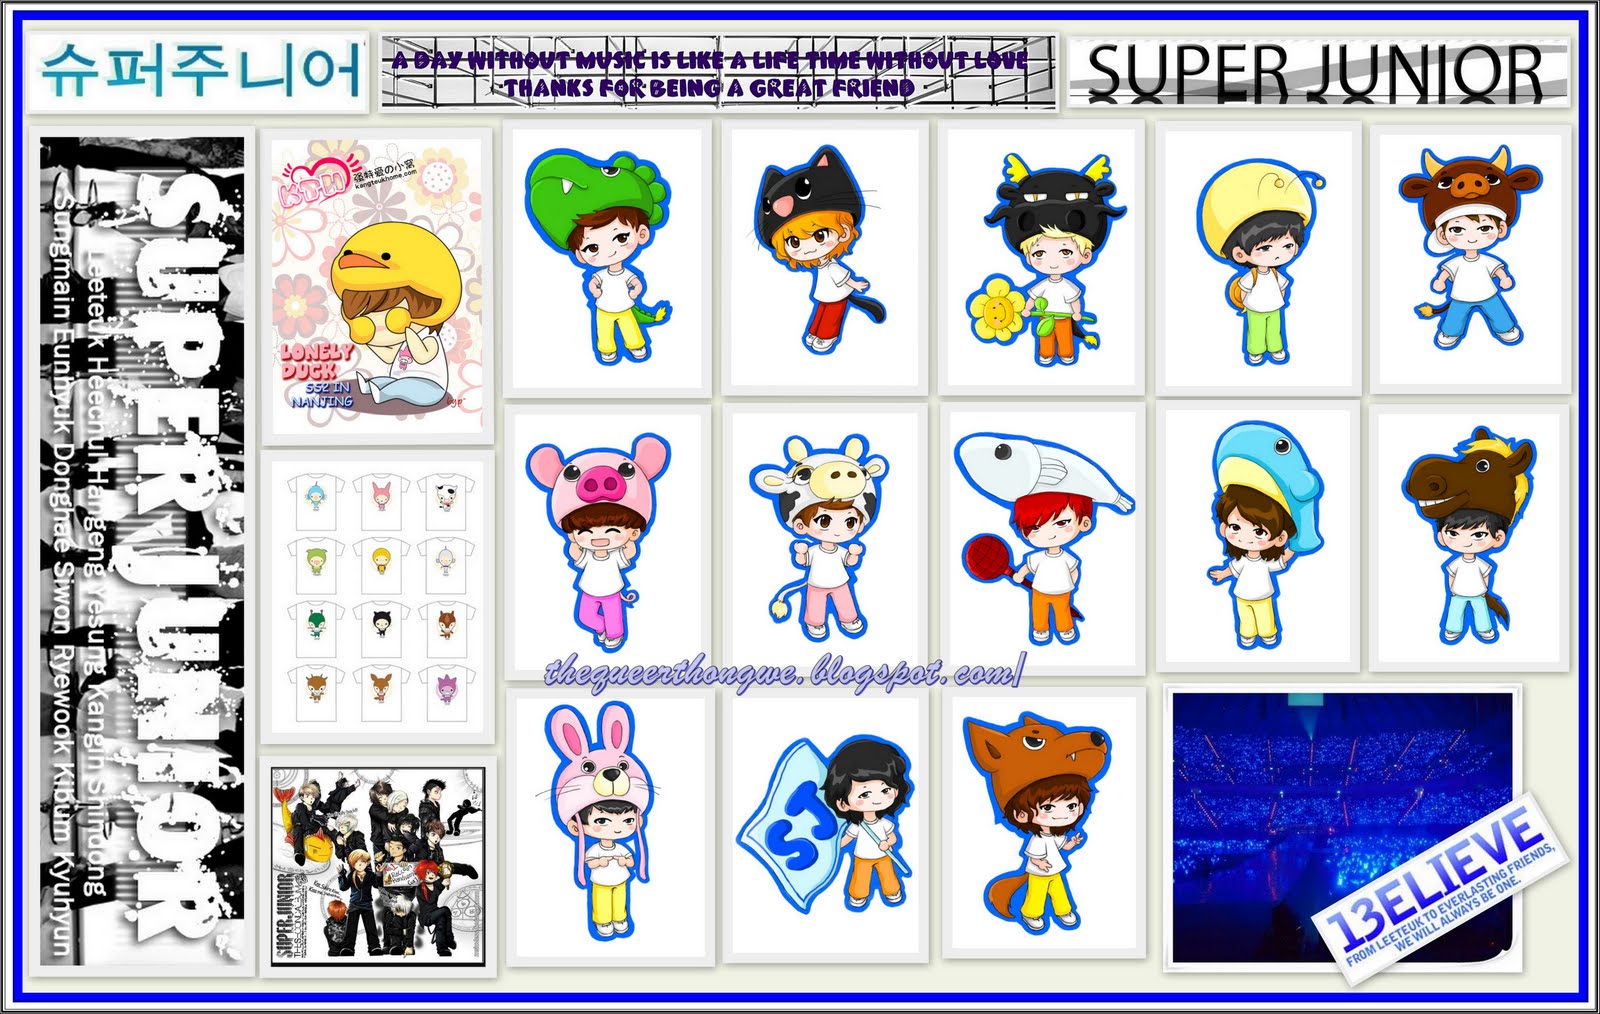 thequeerthongwe: [FAN MADE] SUPER JUNIOR WALLPAPER (ANIME)